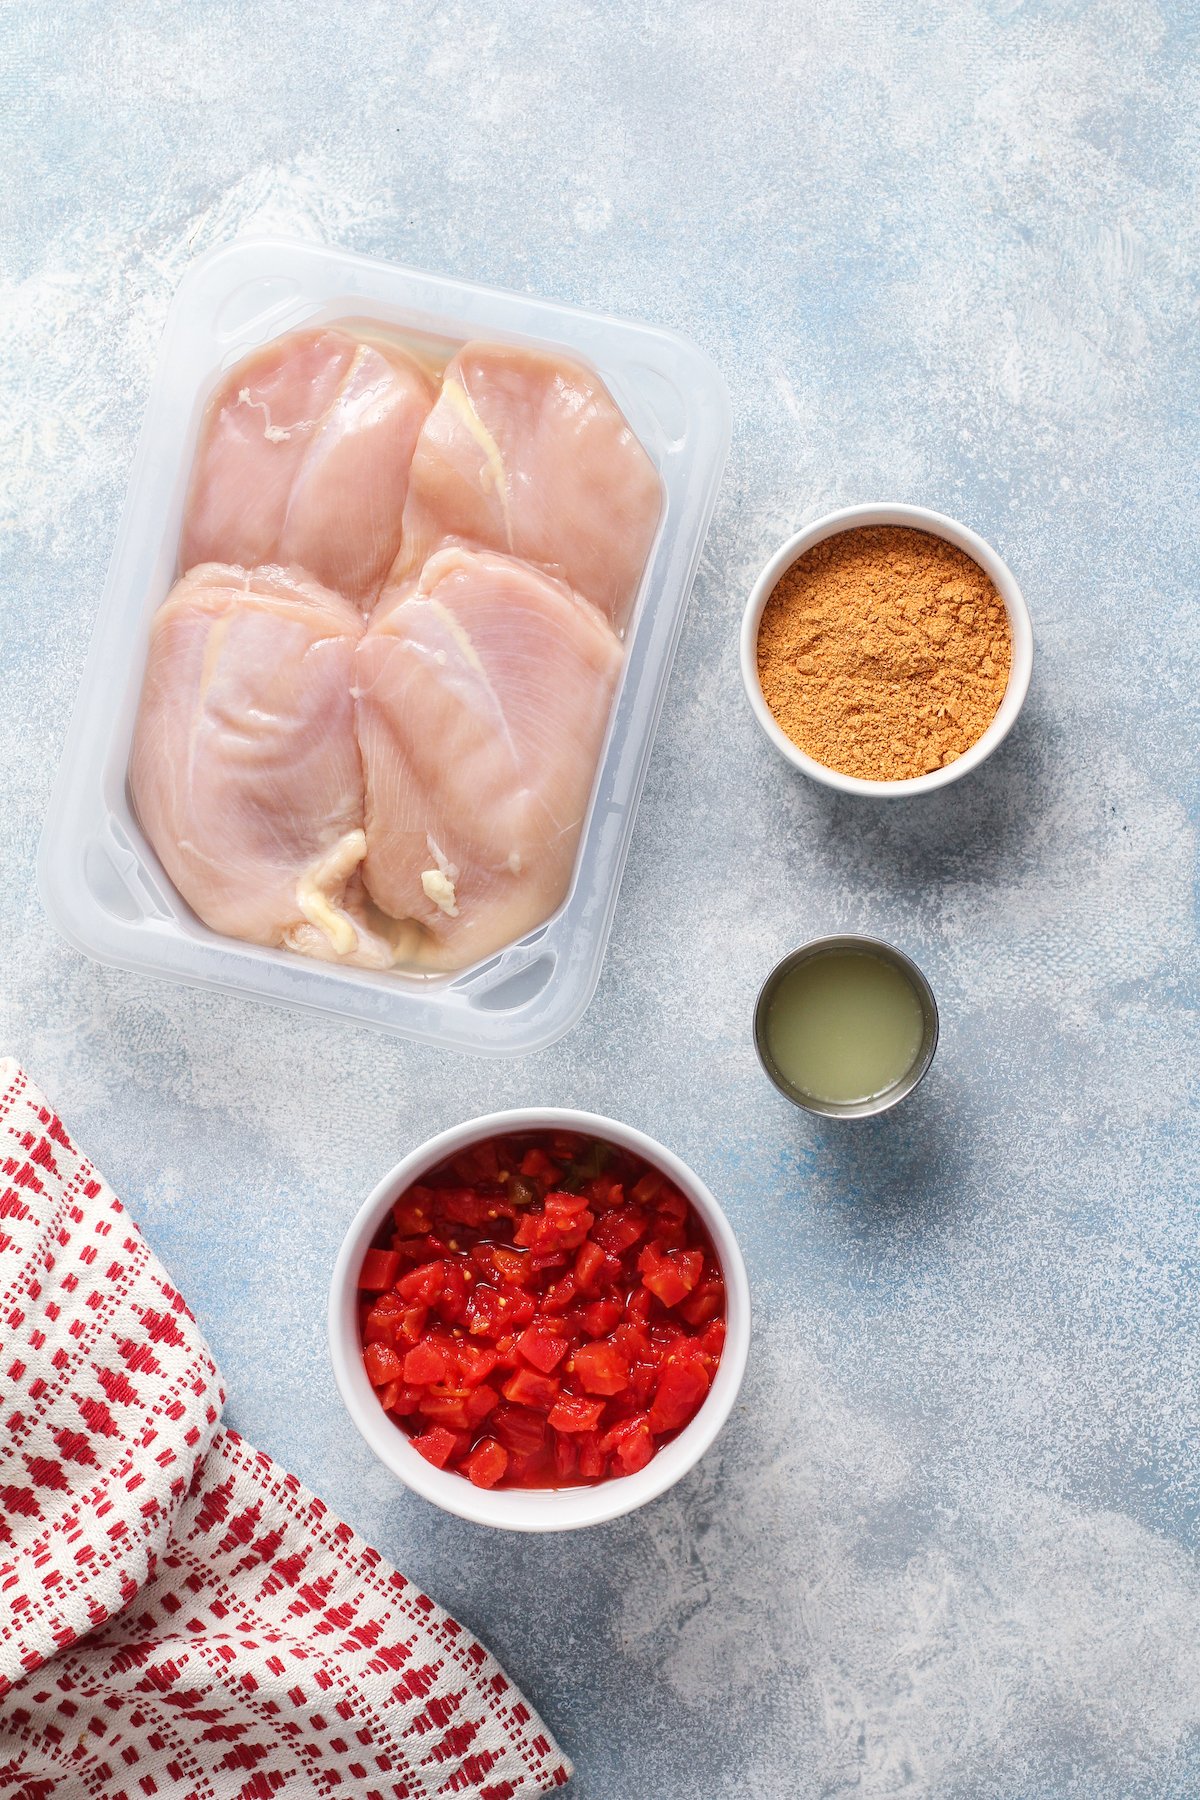 From top left: Raw chicken breasts, taco seasoning, lime juice, canned rotel tomatoes.